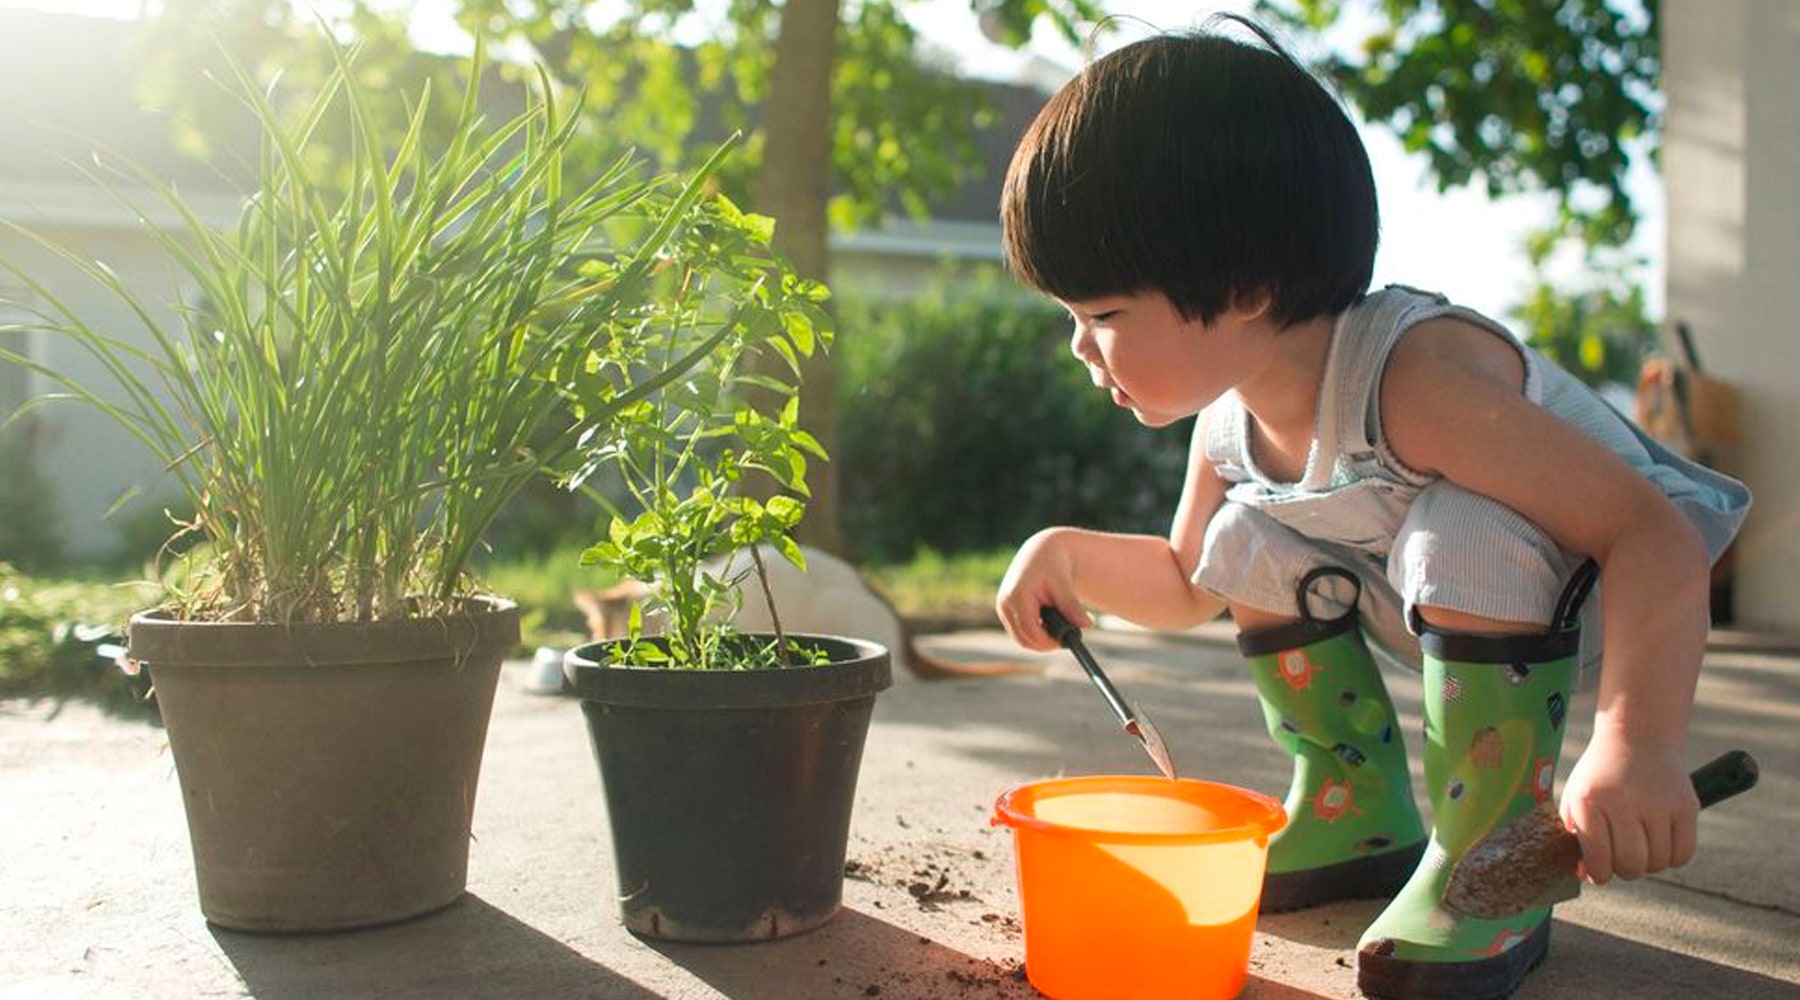 Top 10 Baby-Friendly Plants